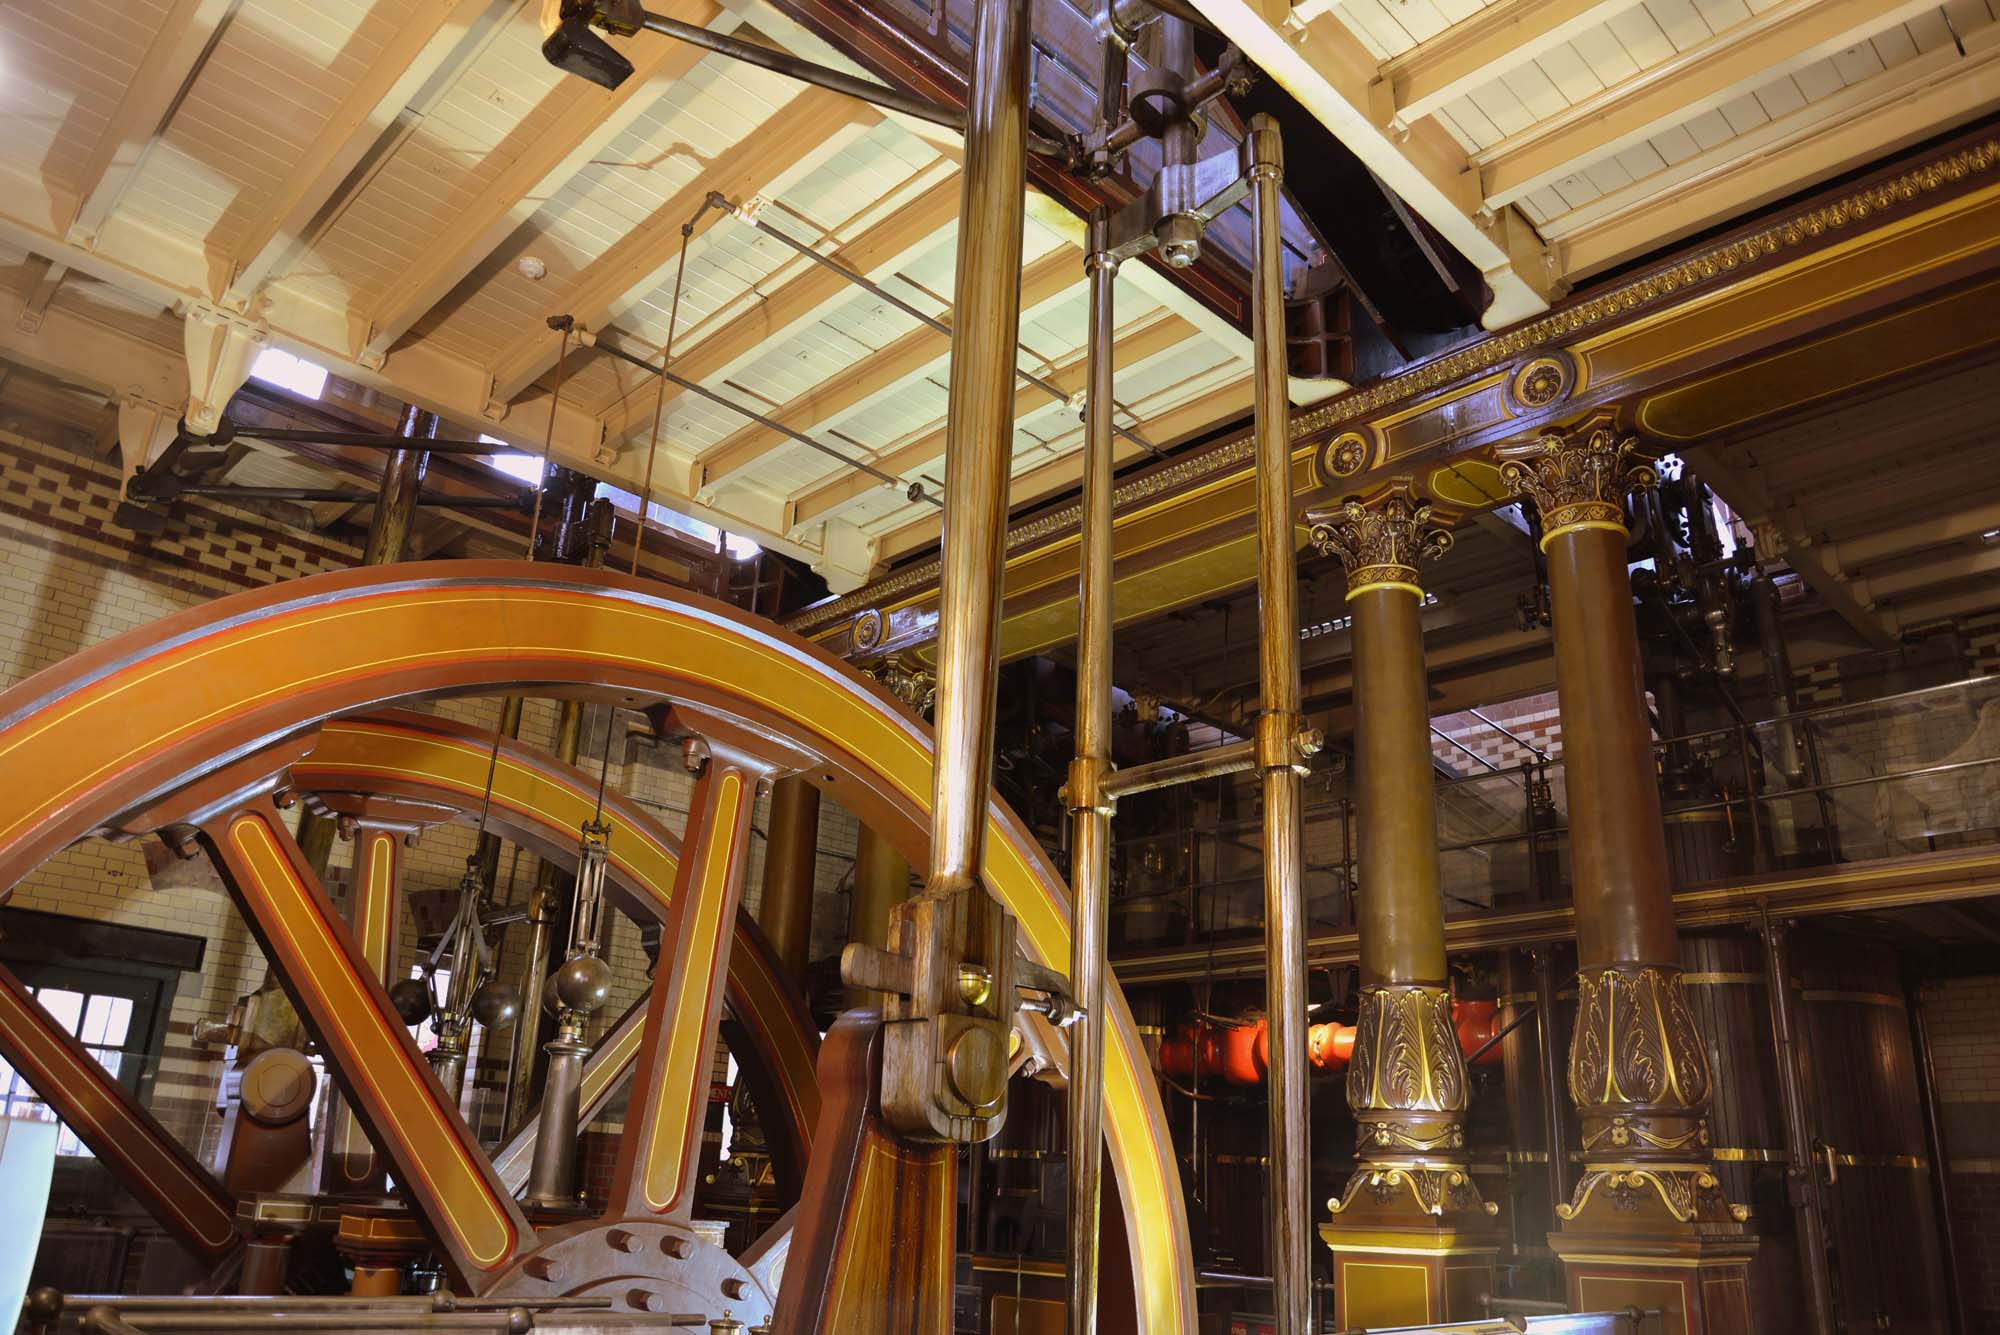 The unique beam engines at Abbey Pumping Station Museum -